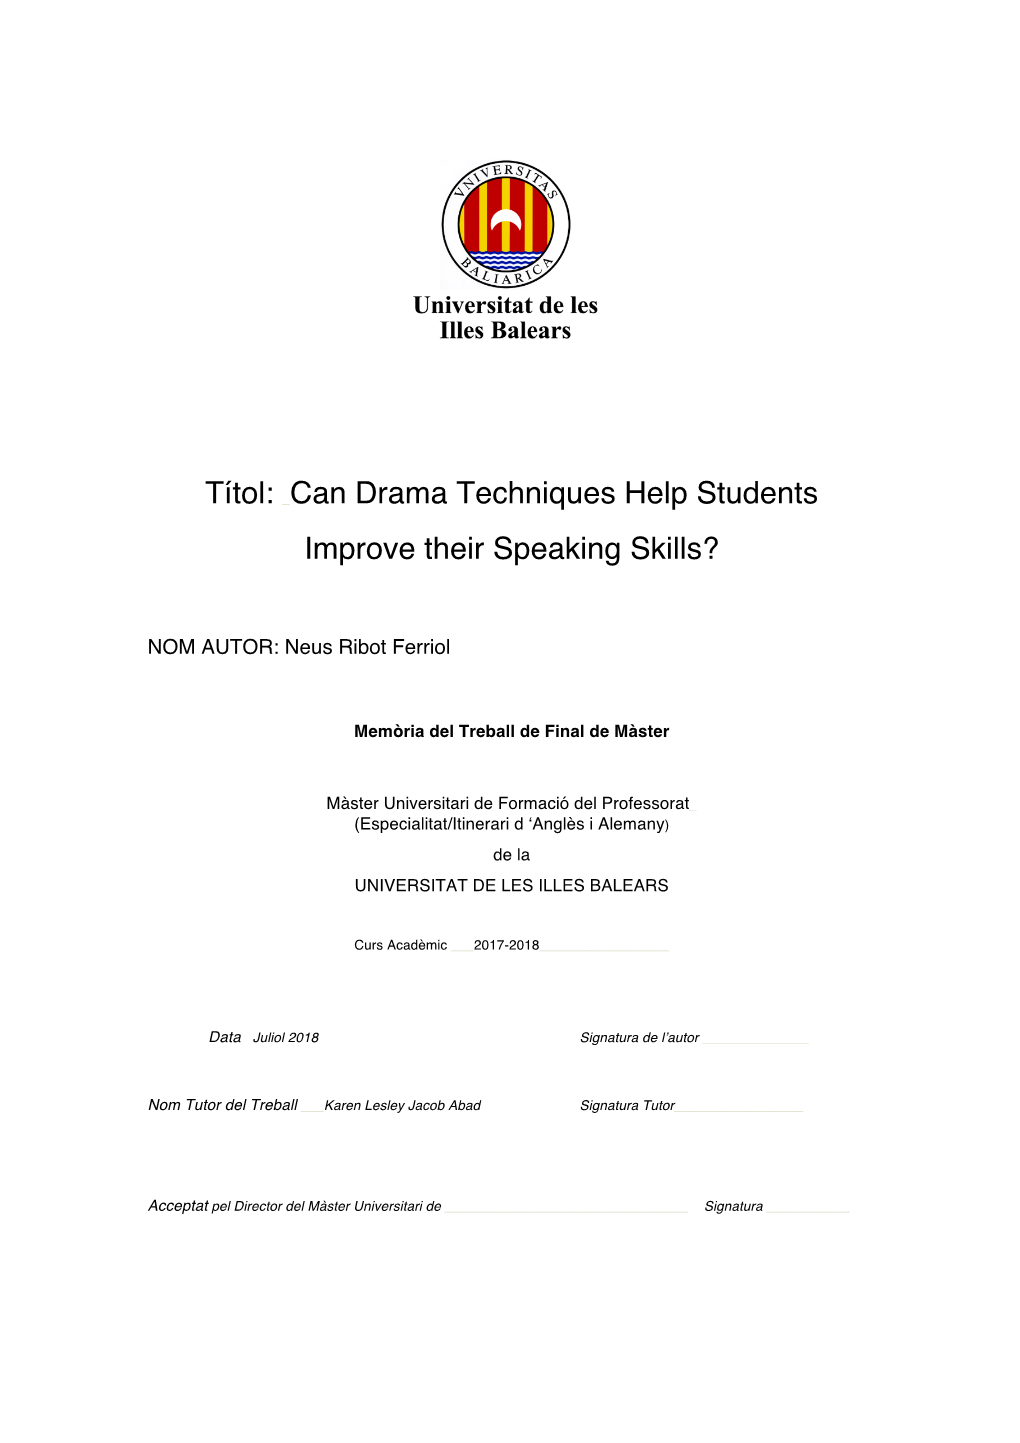 Can Drama Techniques Help Students Improve Their Speaking Skills?